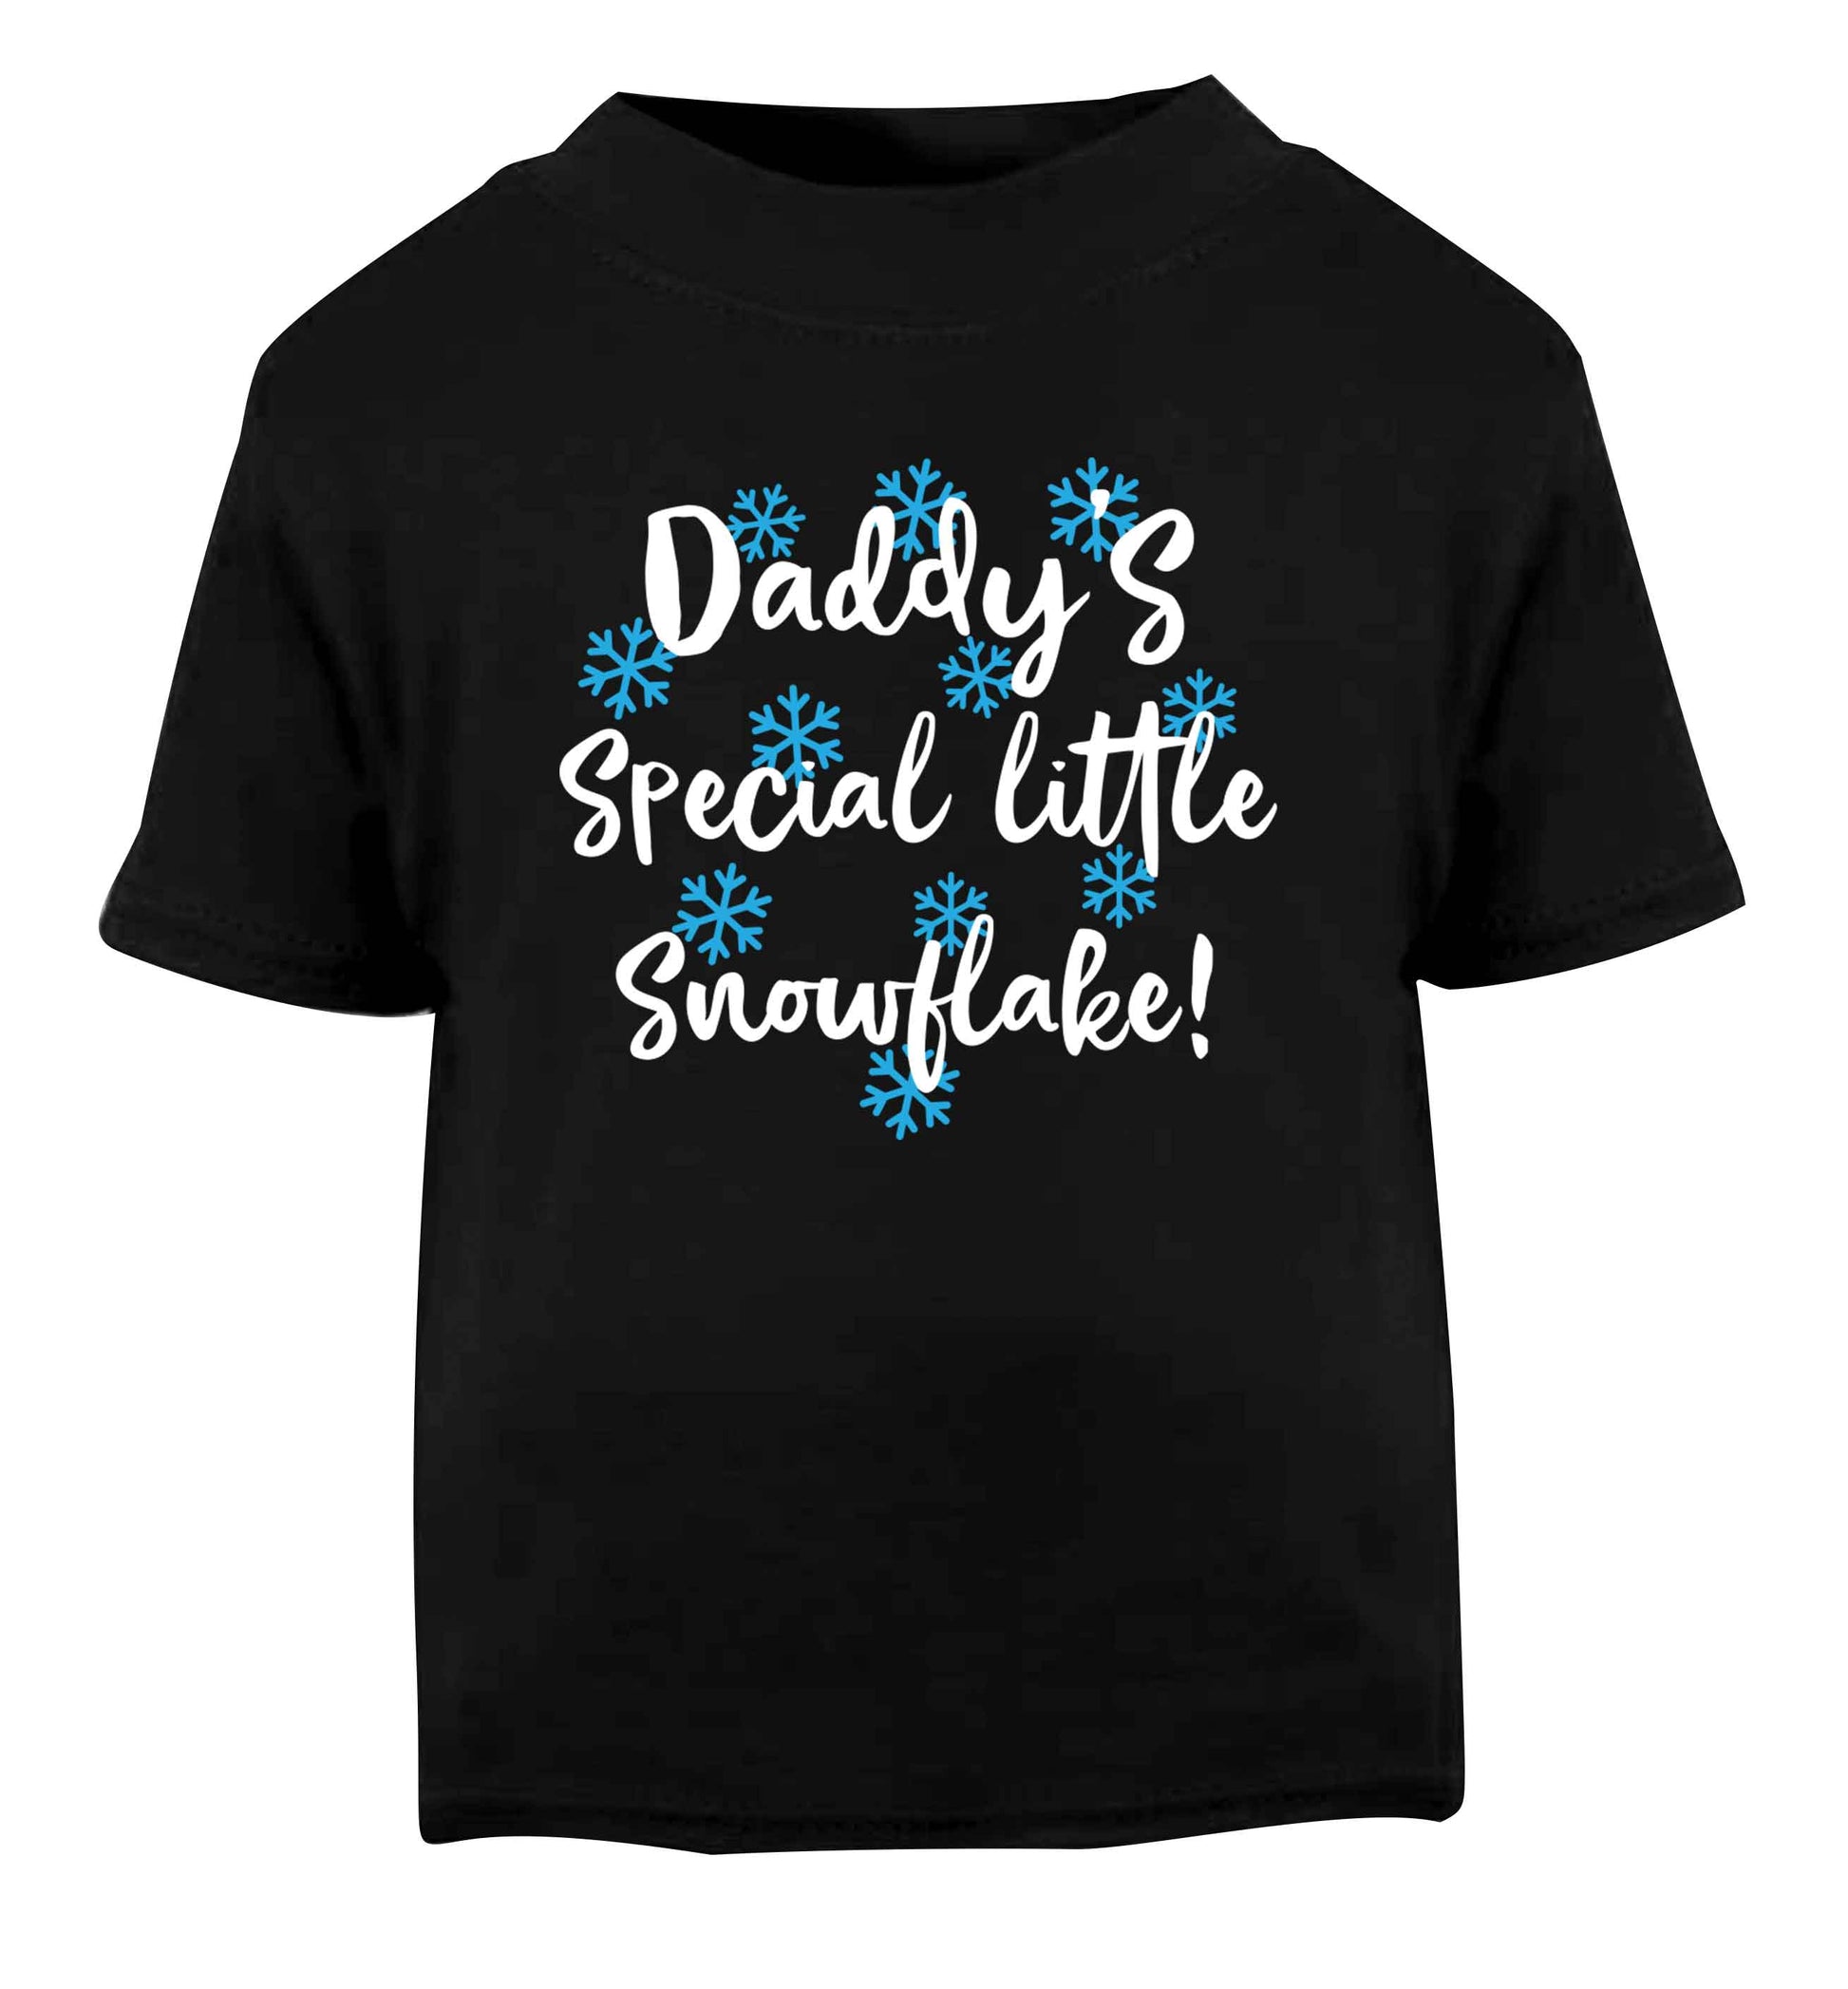 Daddy's special little snowflake Black Baby Toddler Tshirt 2 years